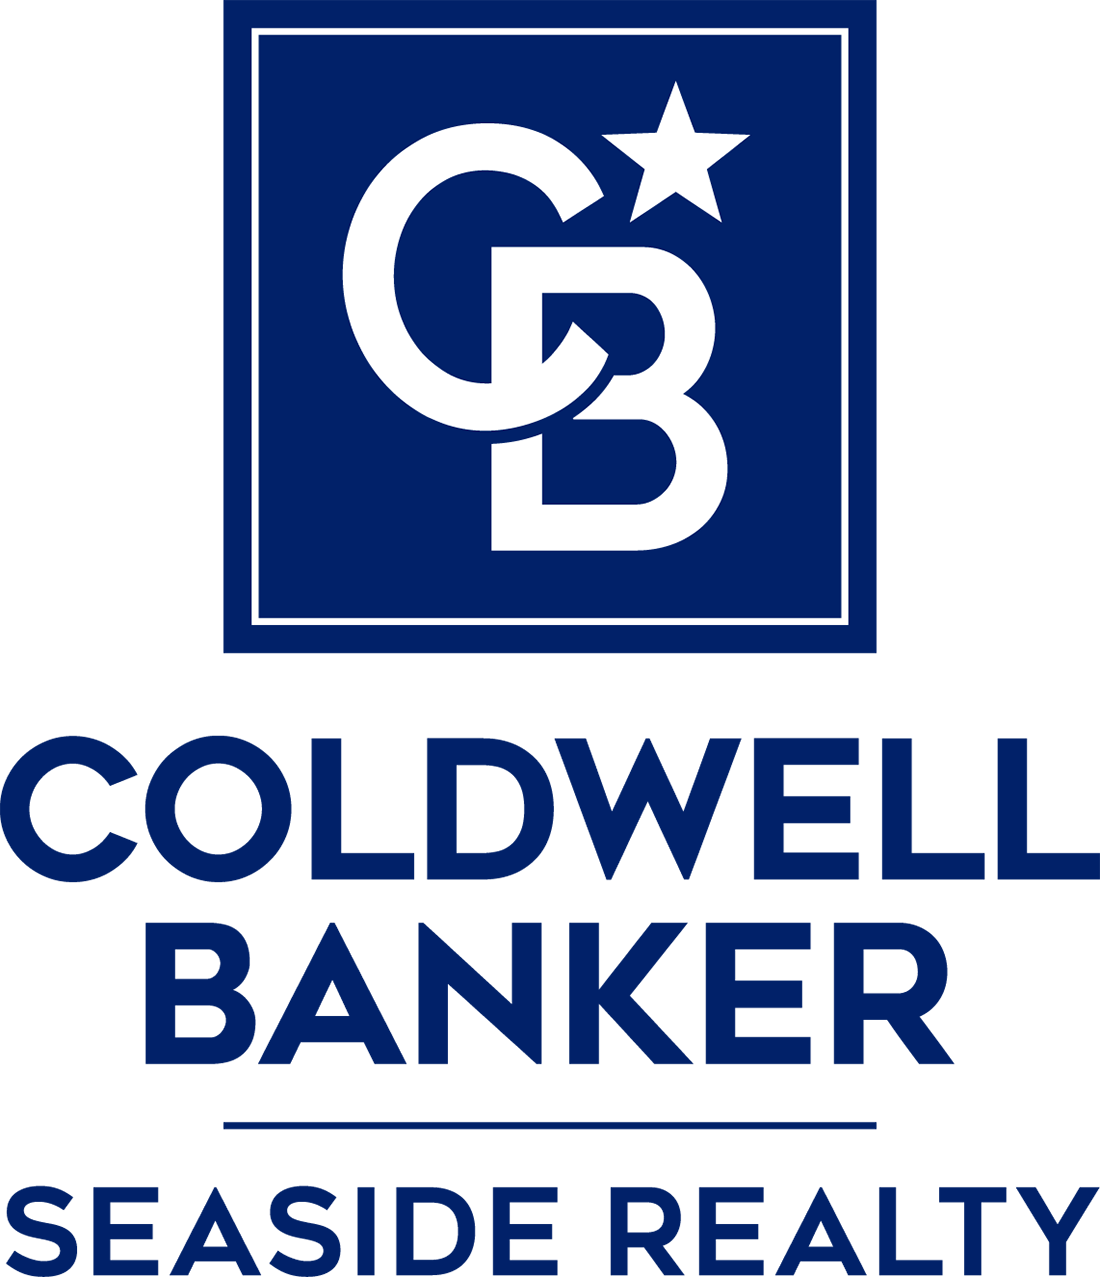 Coldwell Banker Seaside Realty announces expansion of long-term rental market through merger of OBX Housing